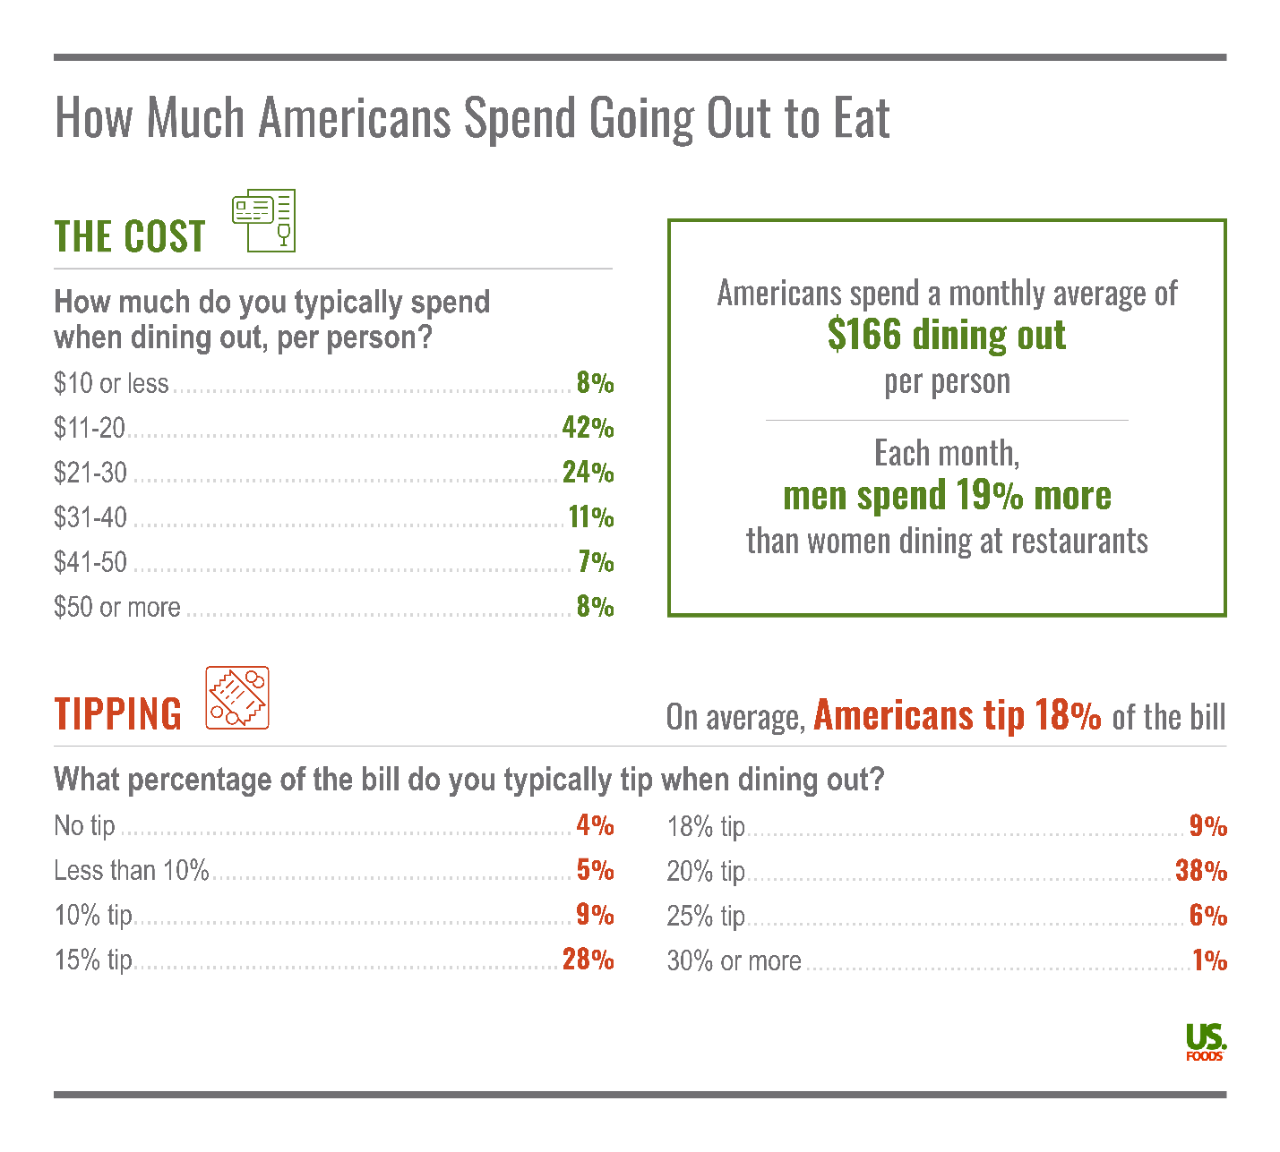 A look at the average cost Americans spend going out to eat - study from usfoods.com